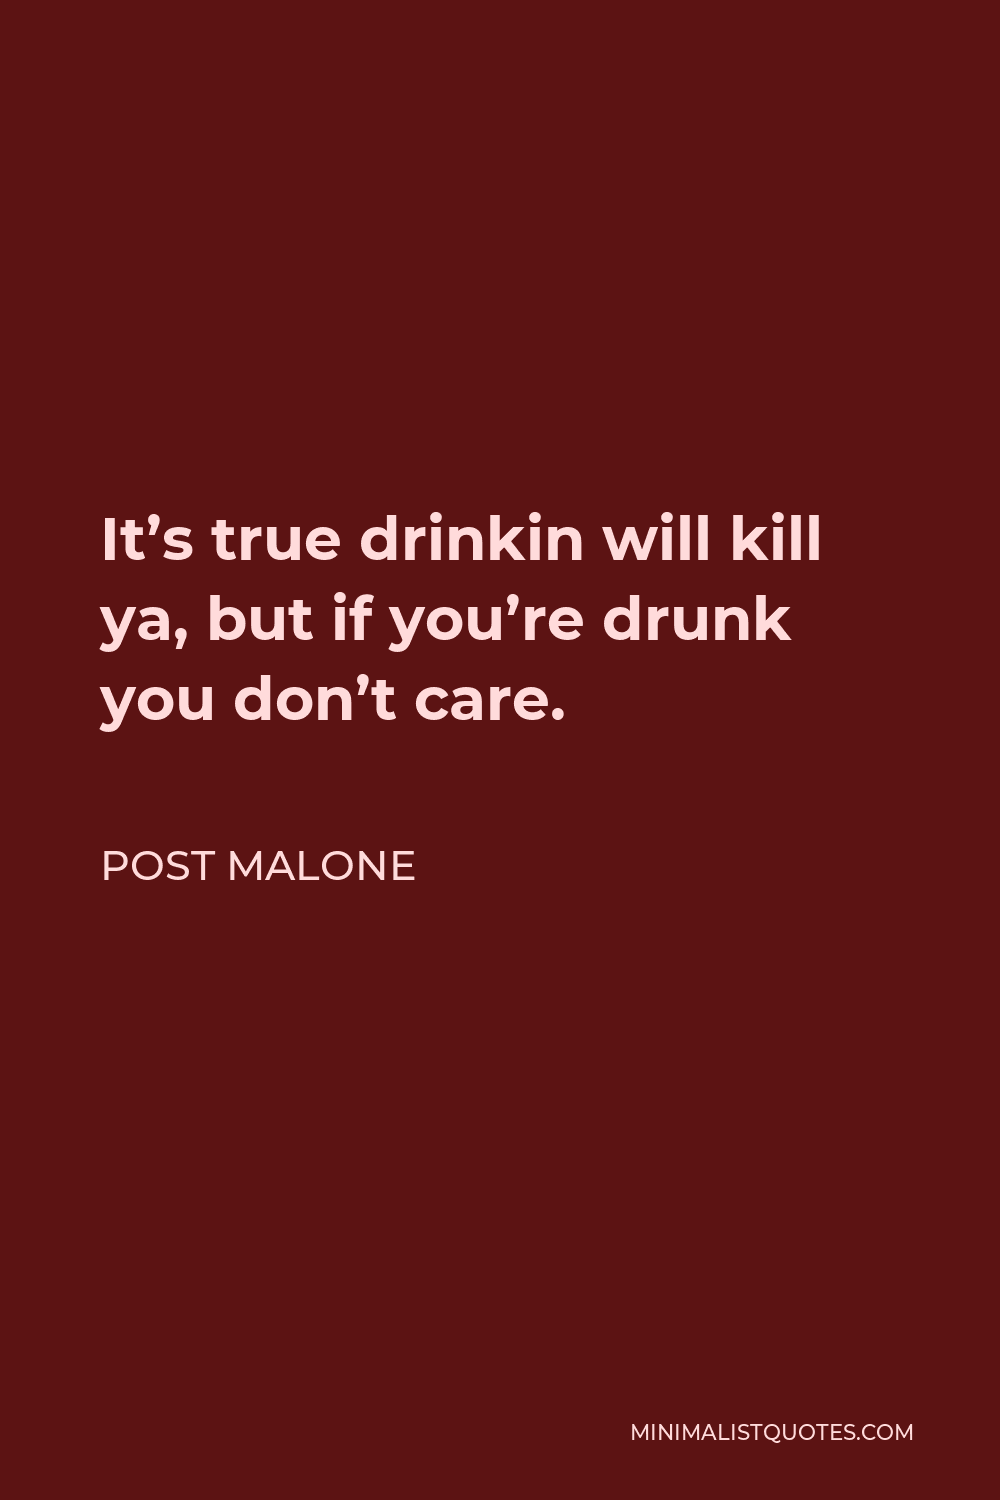 Post Malone Quote - It’s true drinkin will kill ya, but if you’re drunk you don’t care.